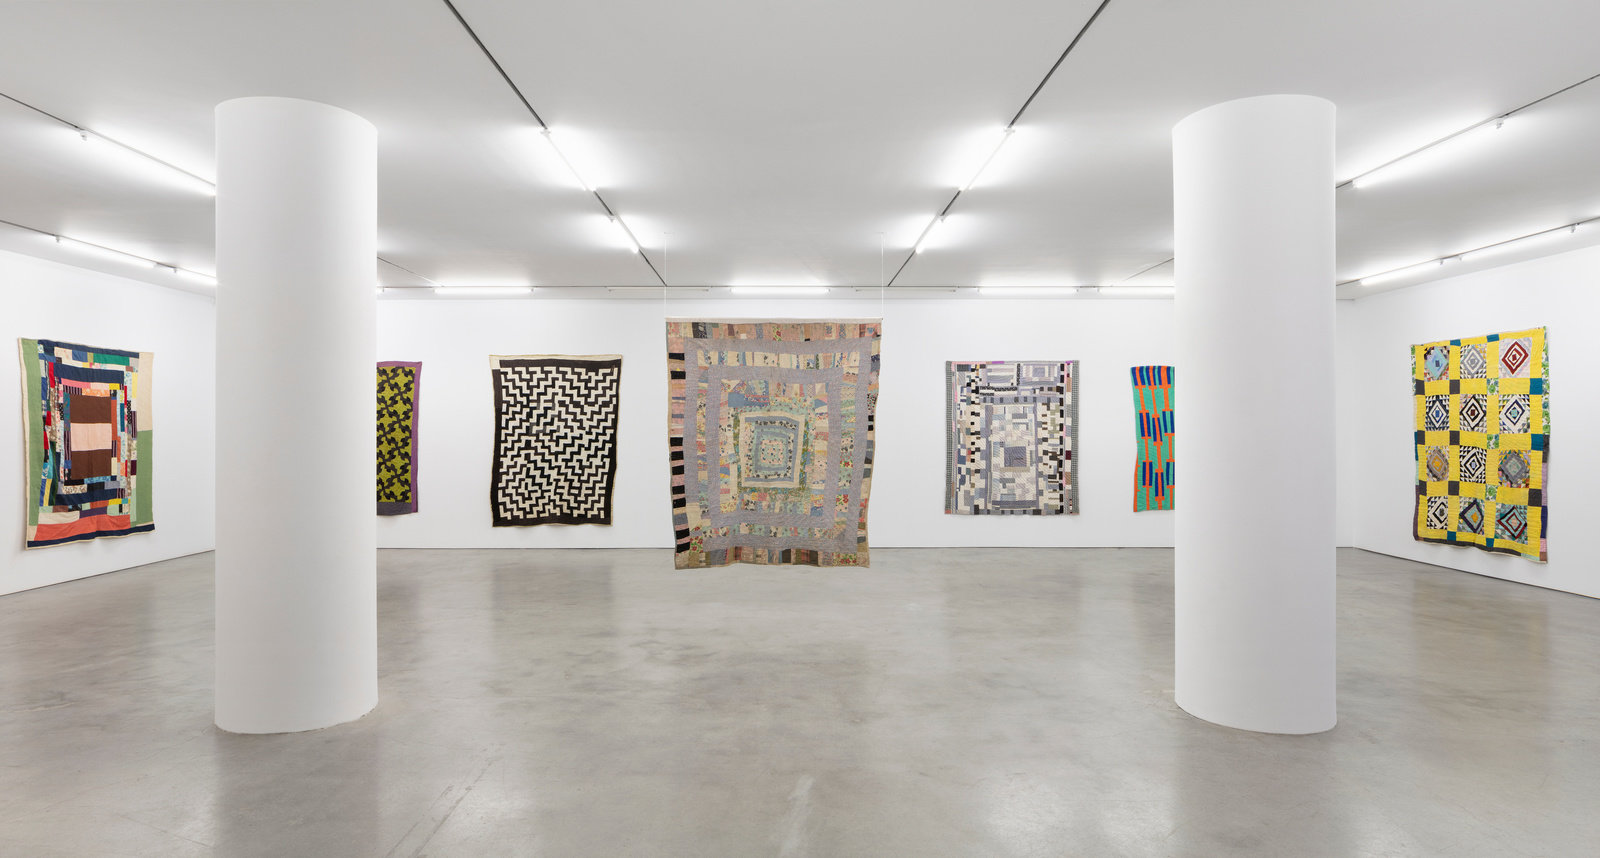 An installation view of various quilts displayed on three walls.